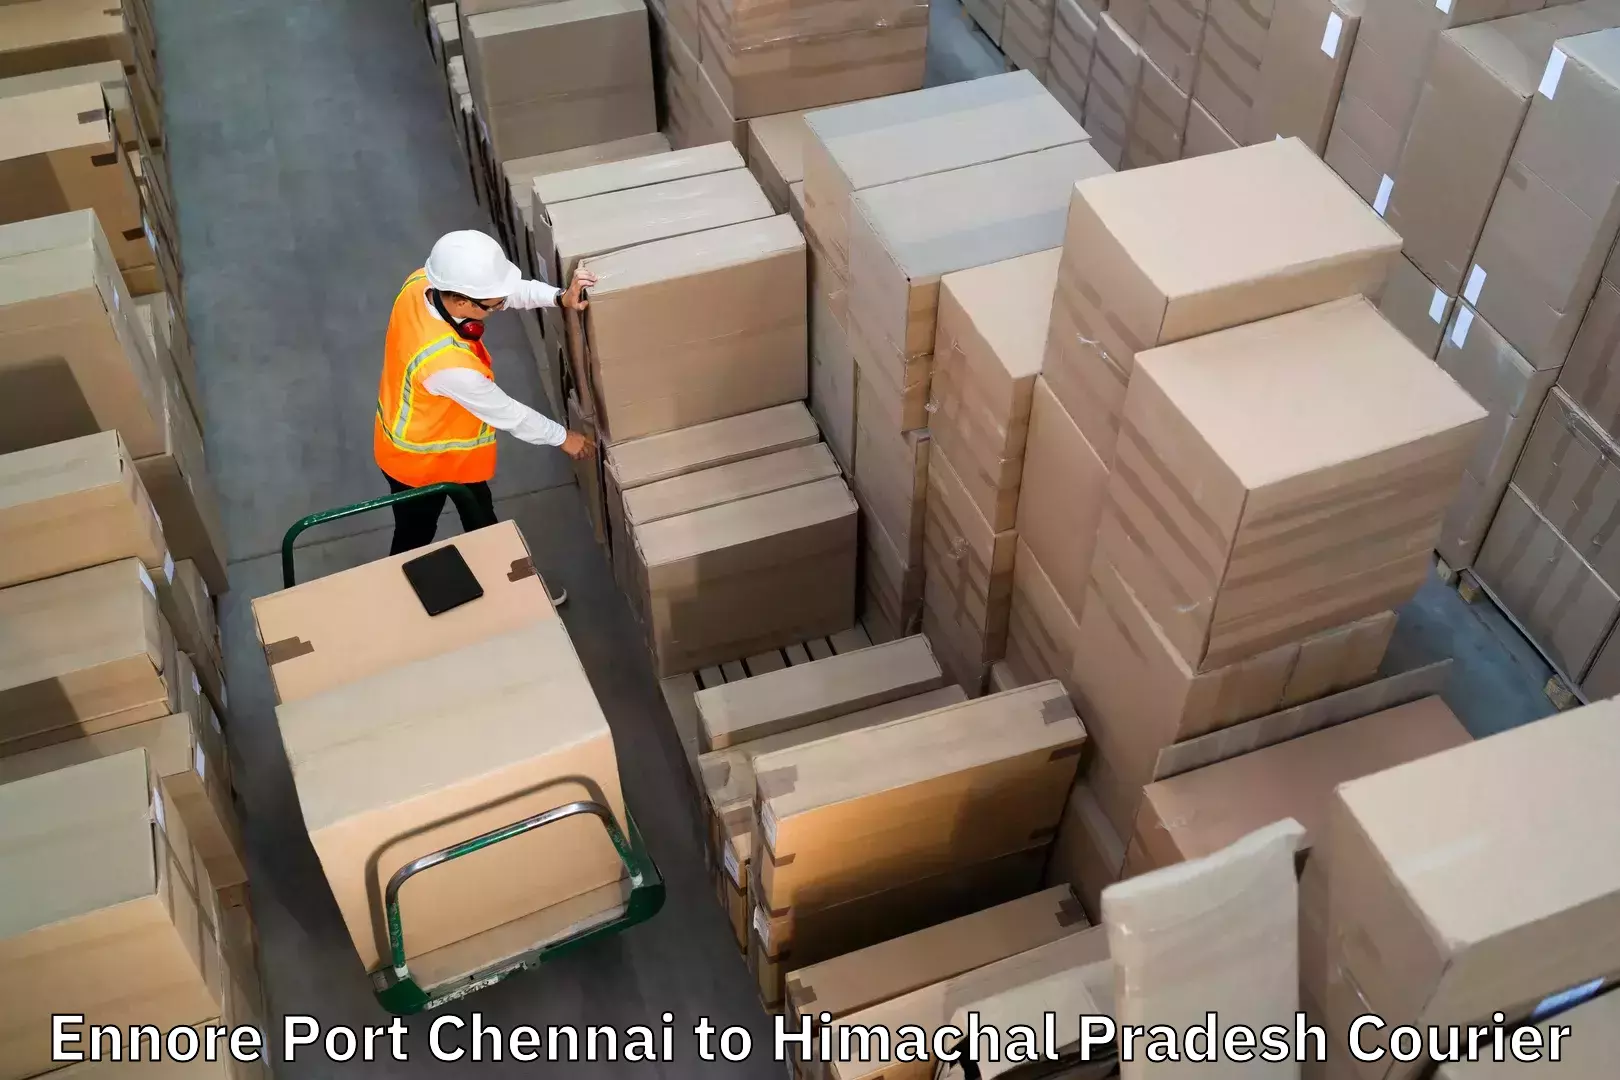 Door-to-door baggage service Ennore Port Chennai to Chachyot